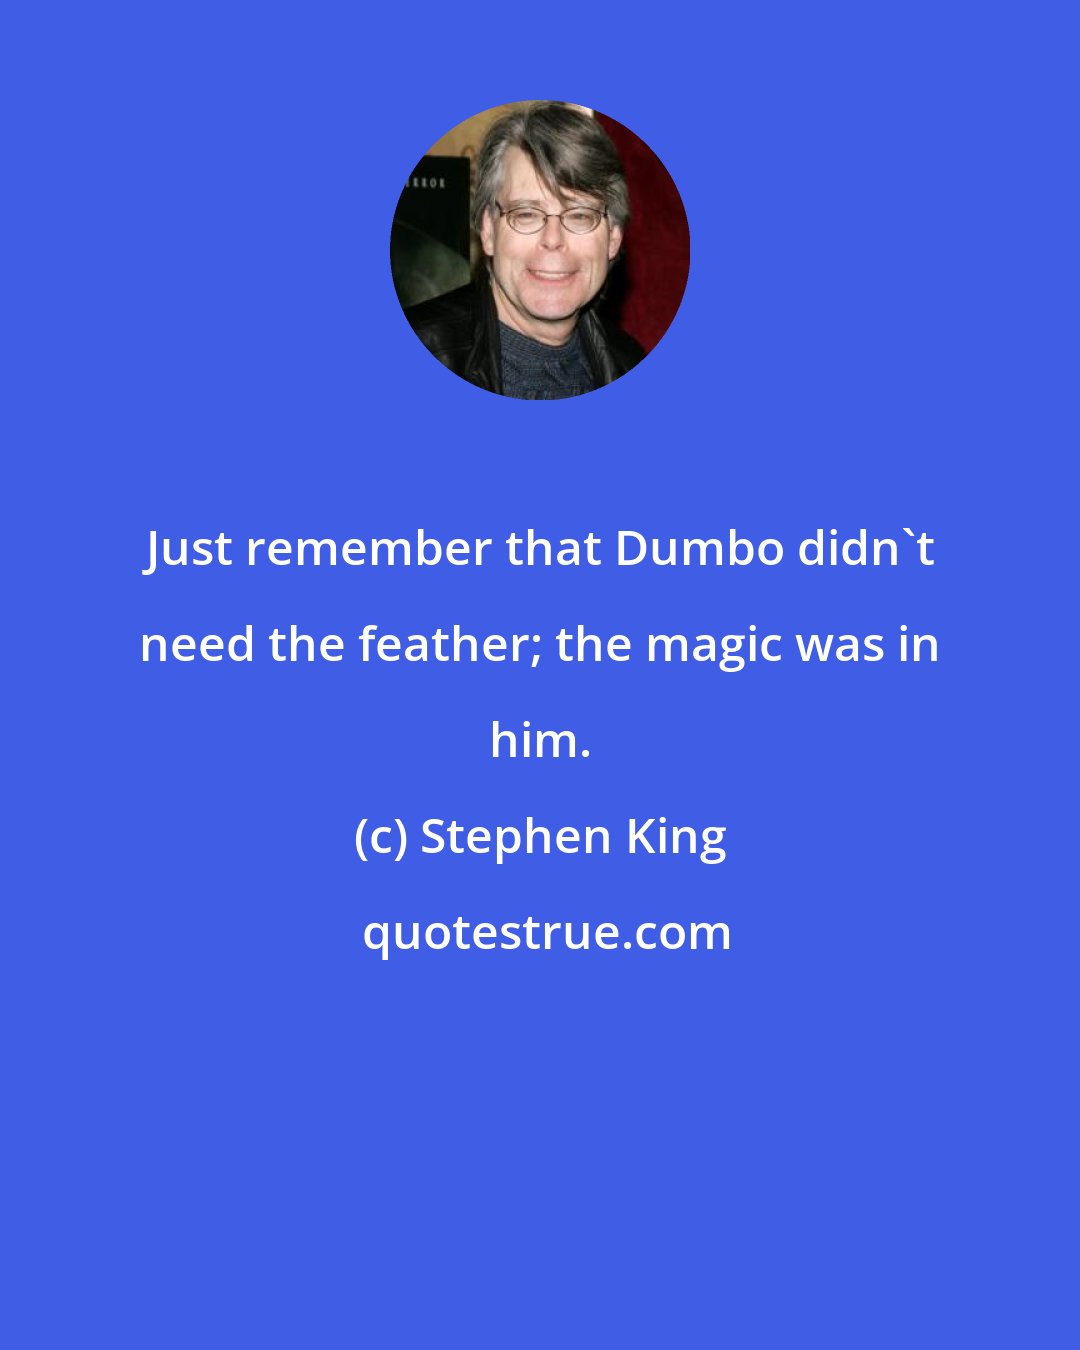 Stephen King: Just remember that Dumbo didn't need the feather; the magic was in him.